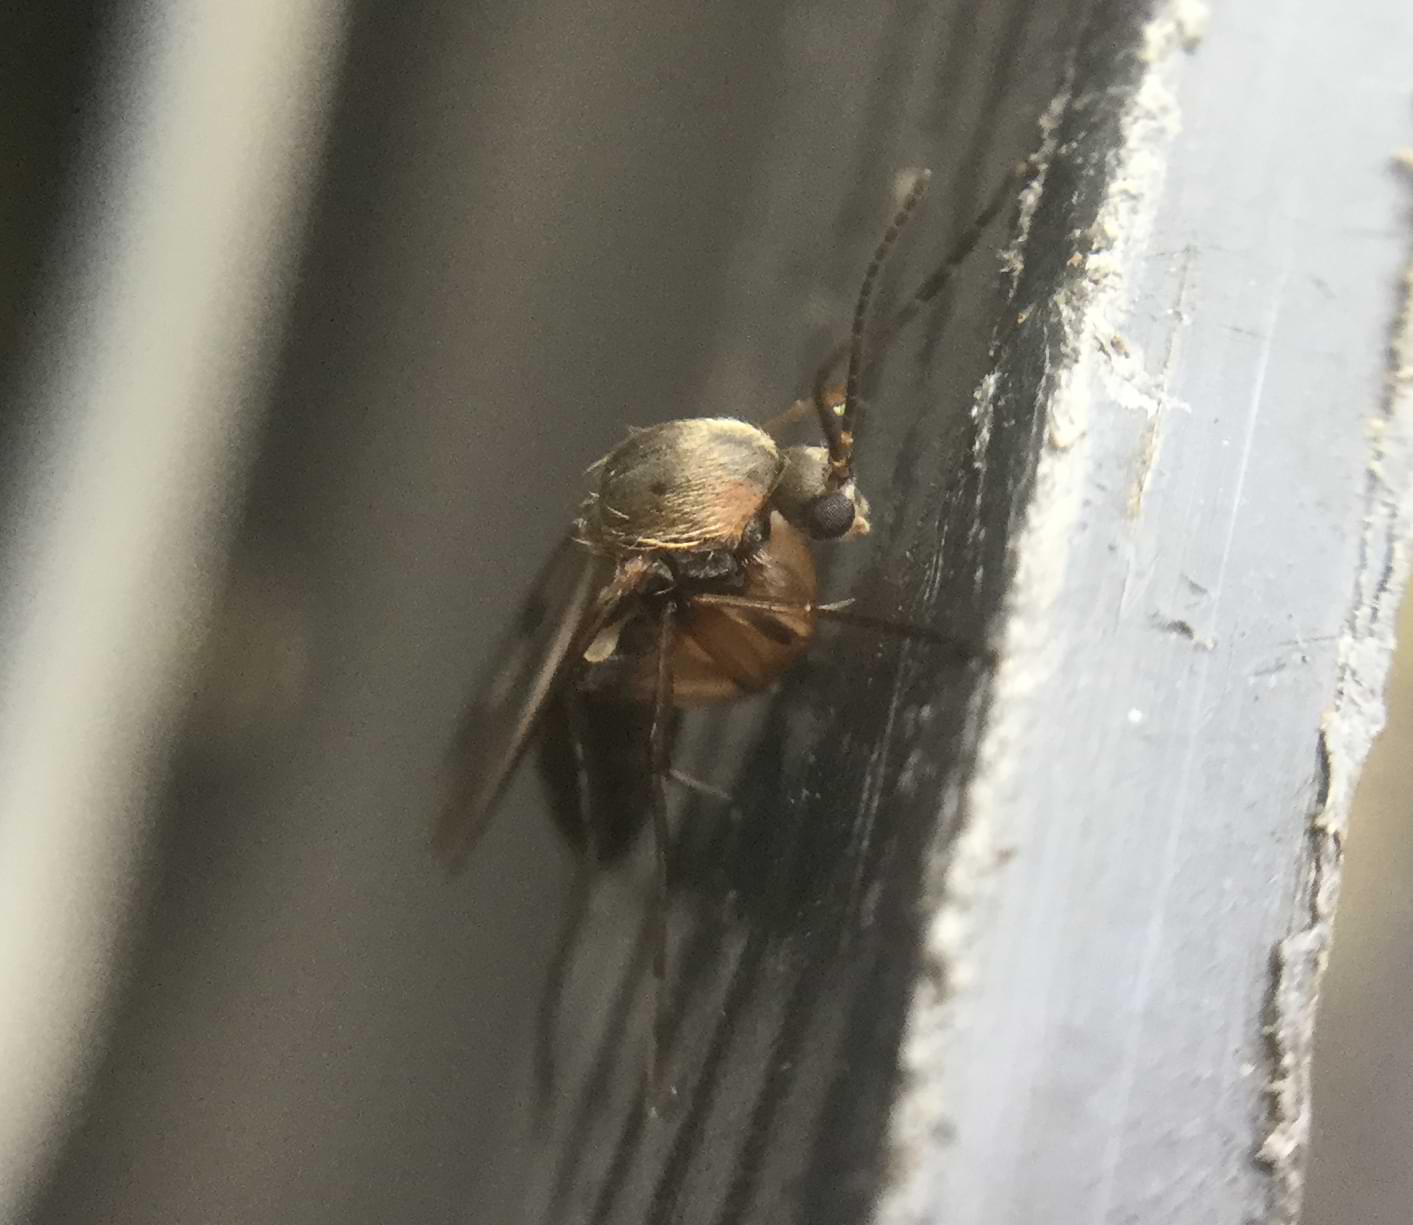 A brown fly with small round eyes like a button.